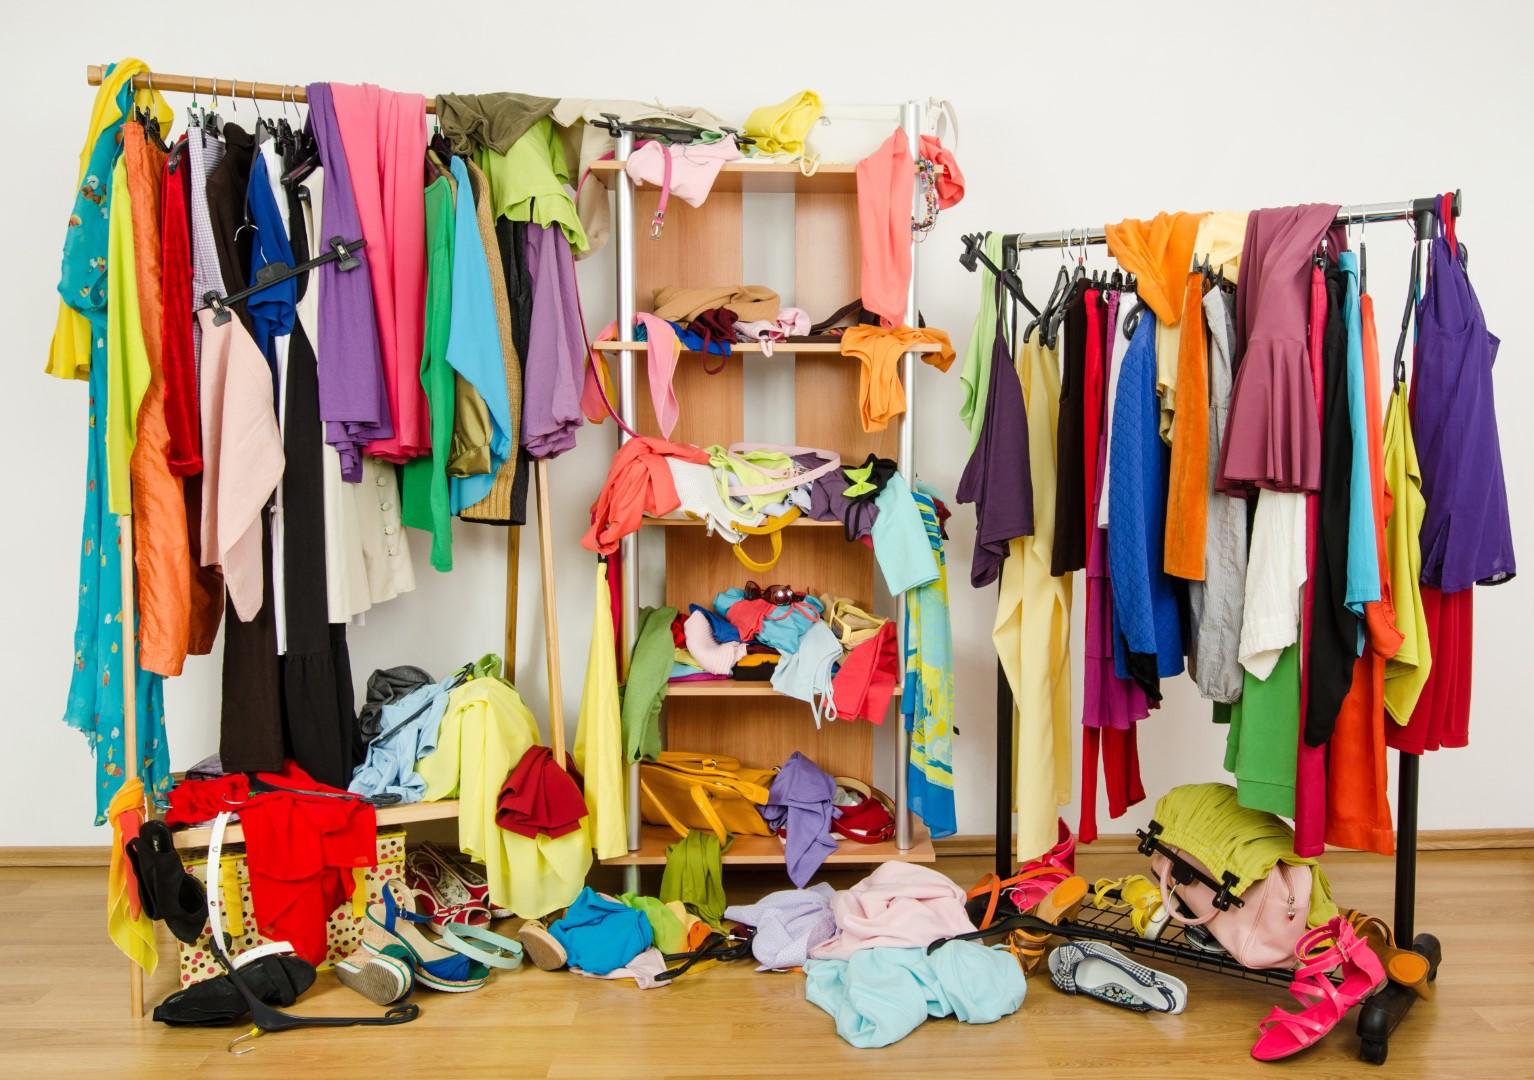 A photo of messy clothing strewn about on shelves